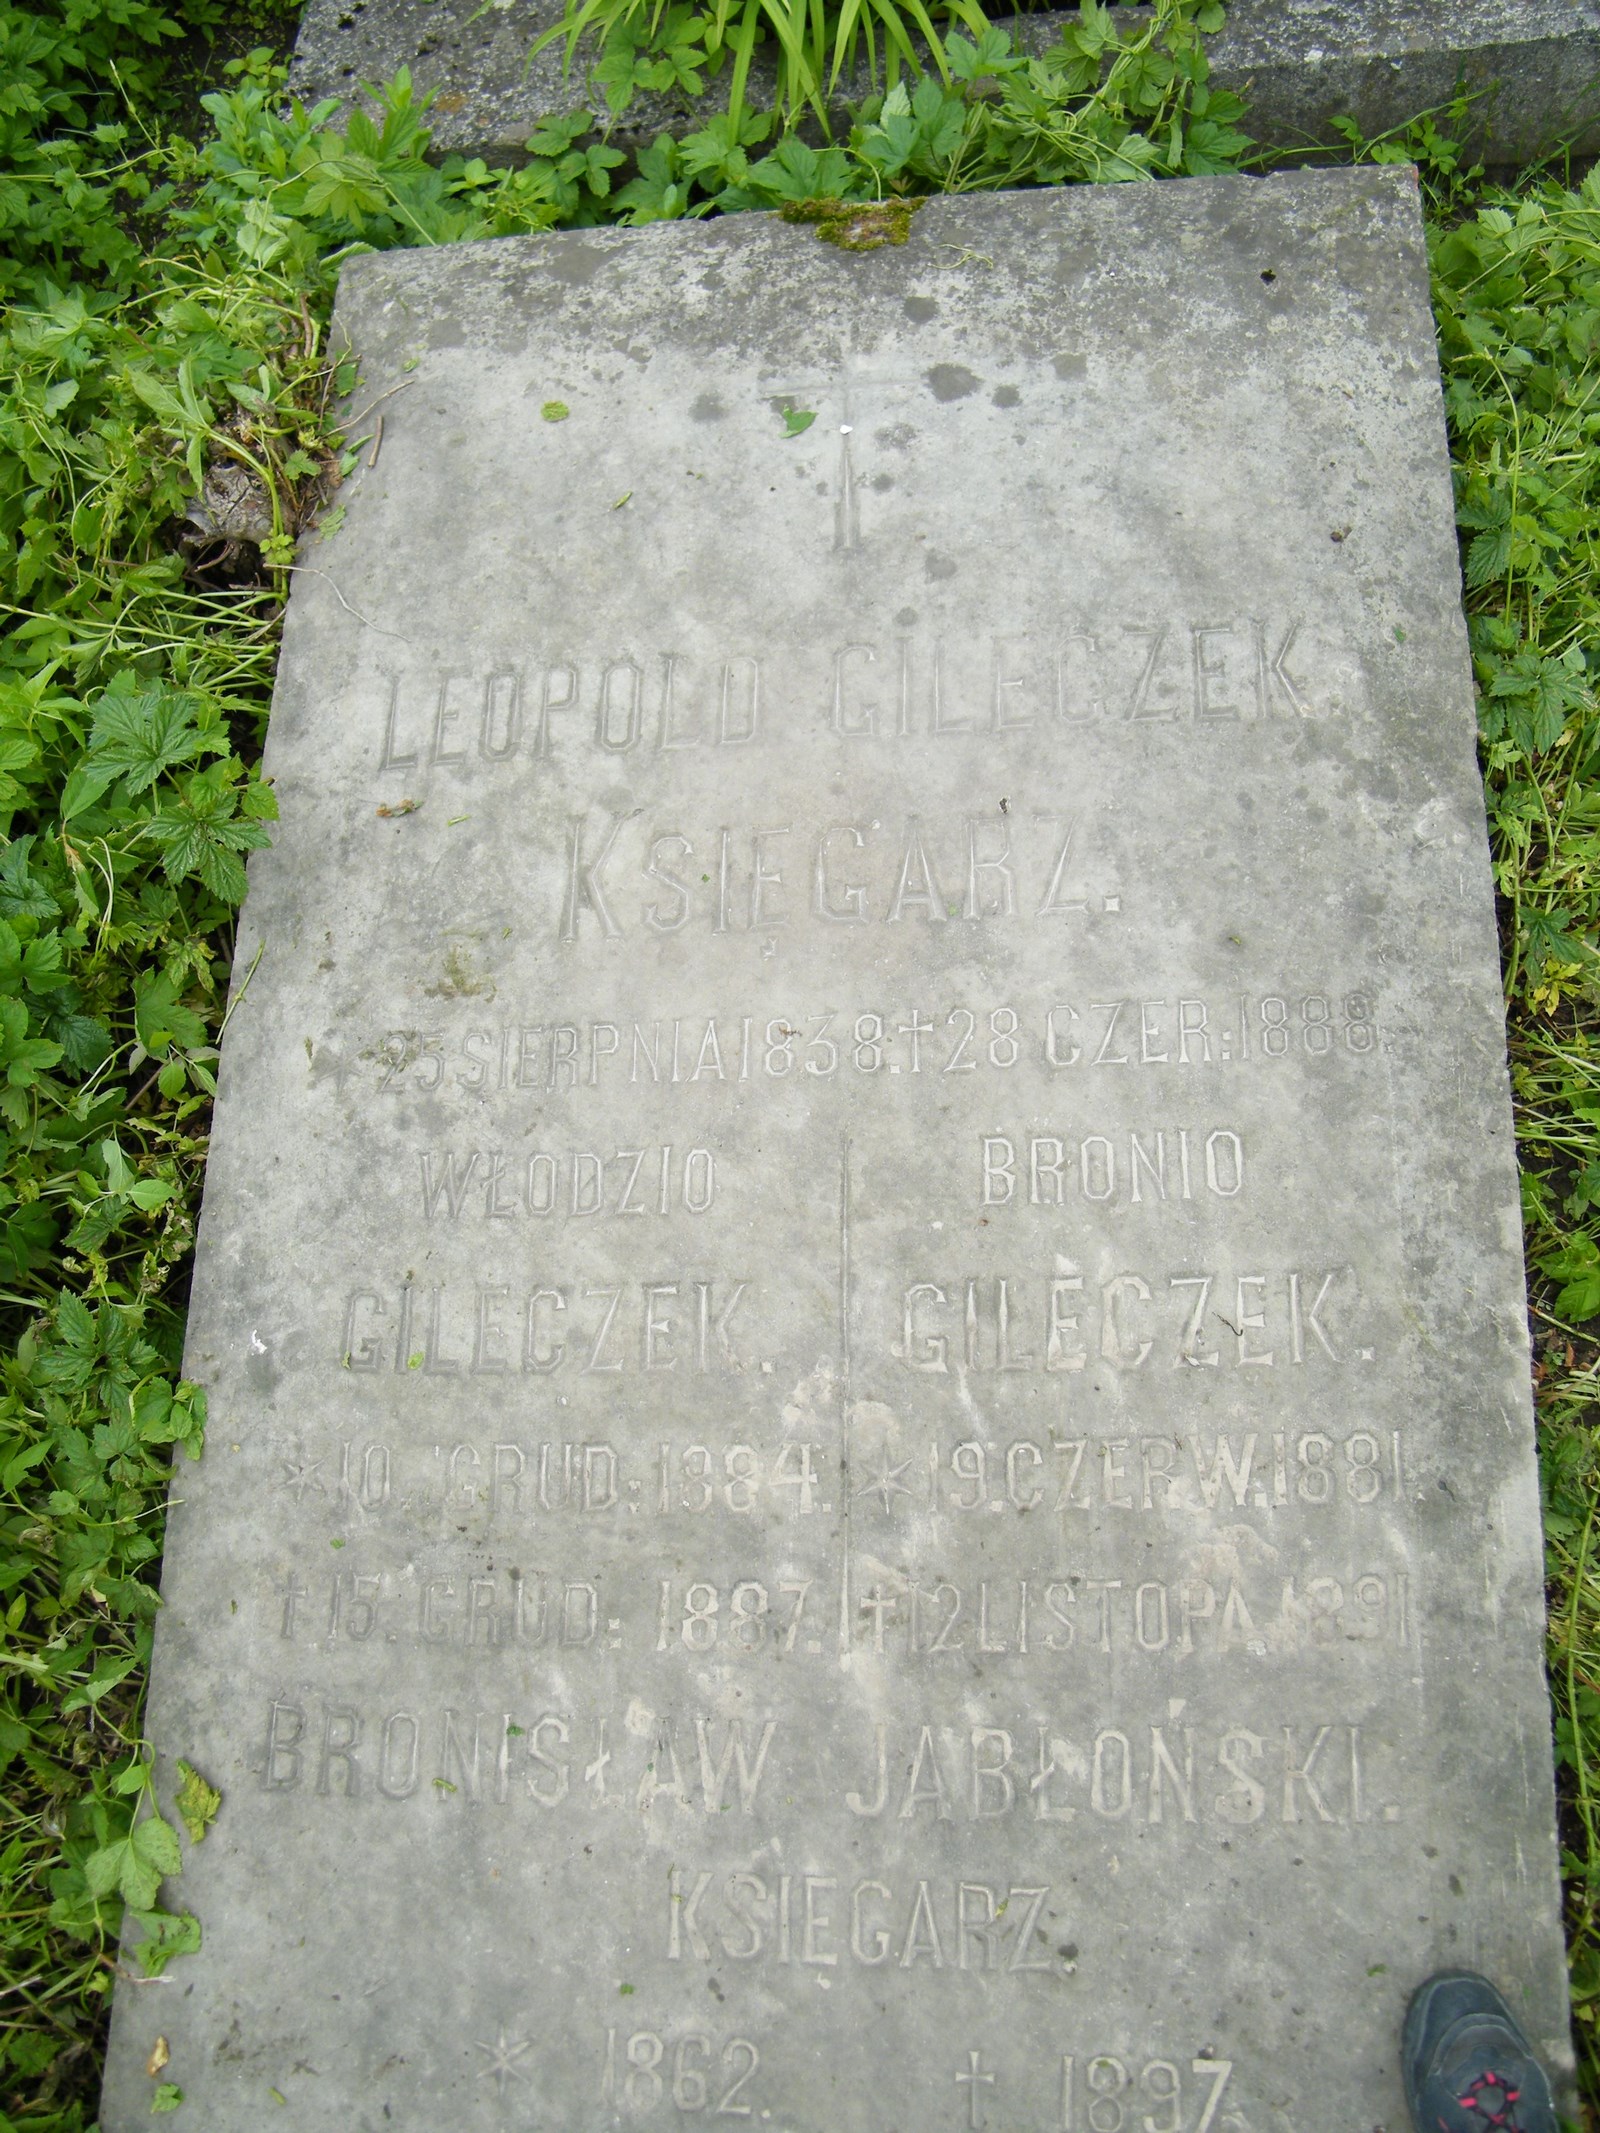 Fragment of the Tombstone of the Gileczek family and Bronislaw Jablonski, Ternopil cemetery, as of 2017.